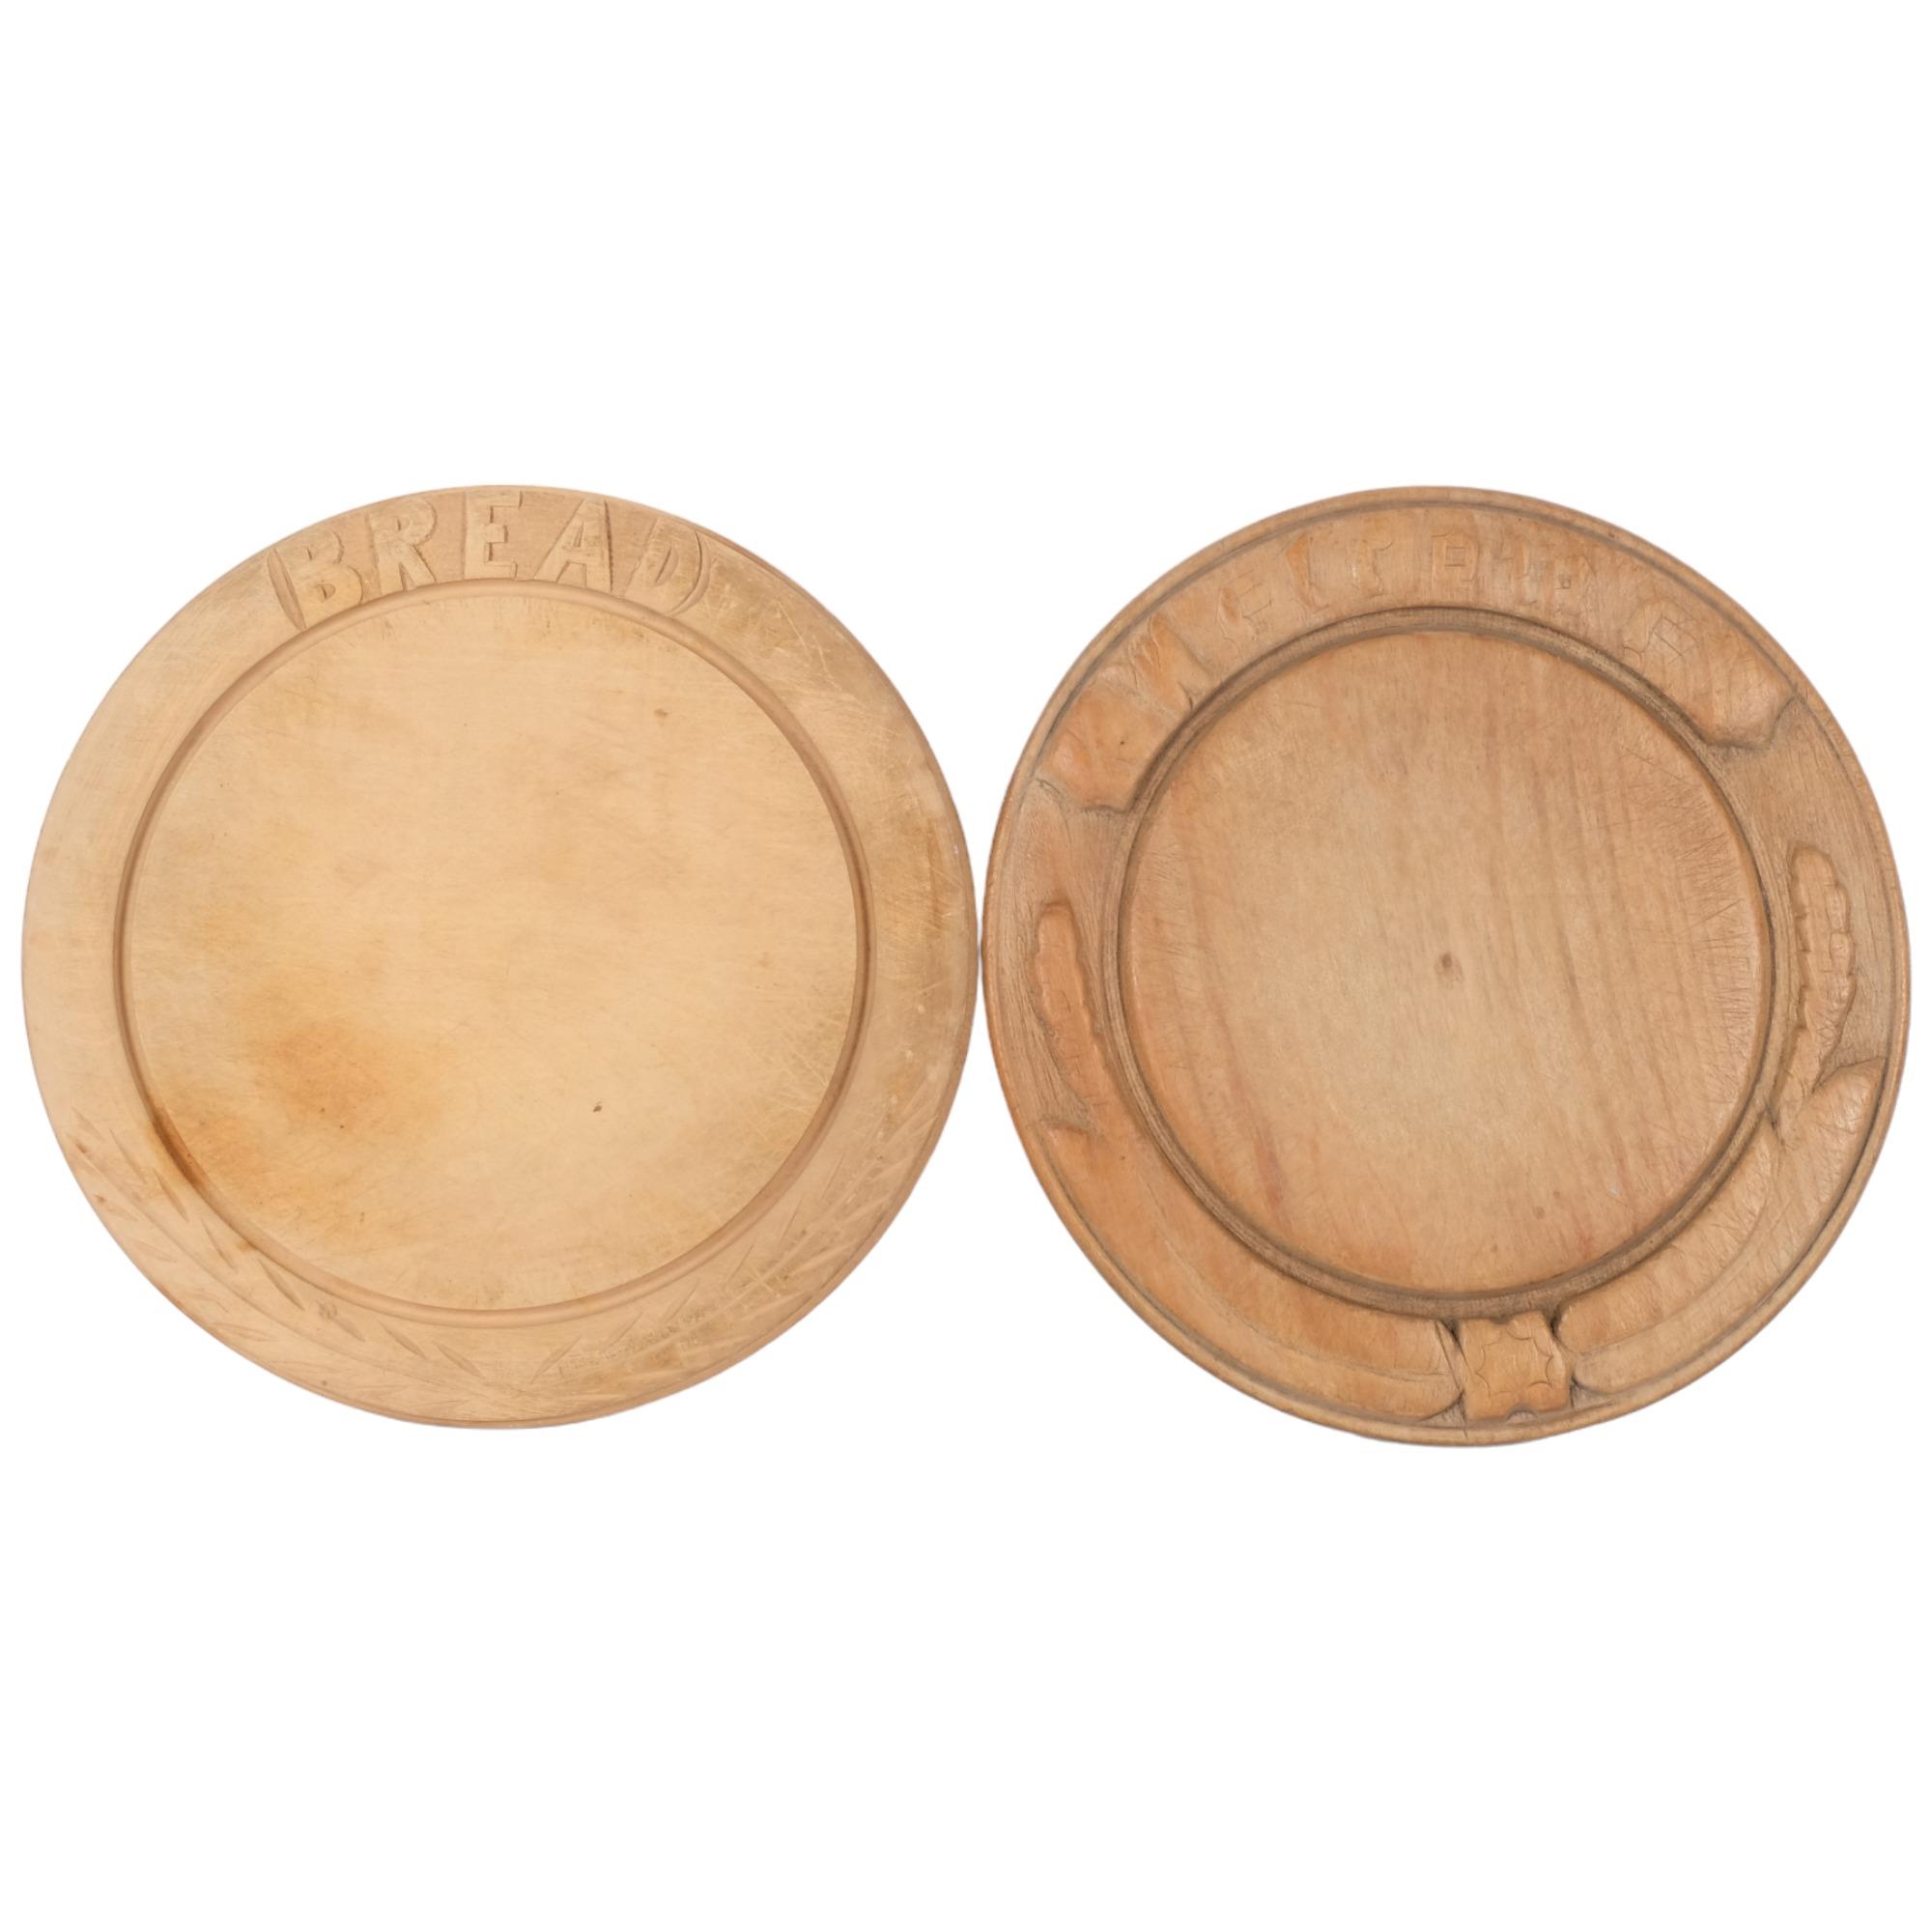 2 x 20th century circular bread boards, with carved decoration, diameter 30cm each